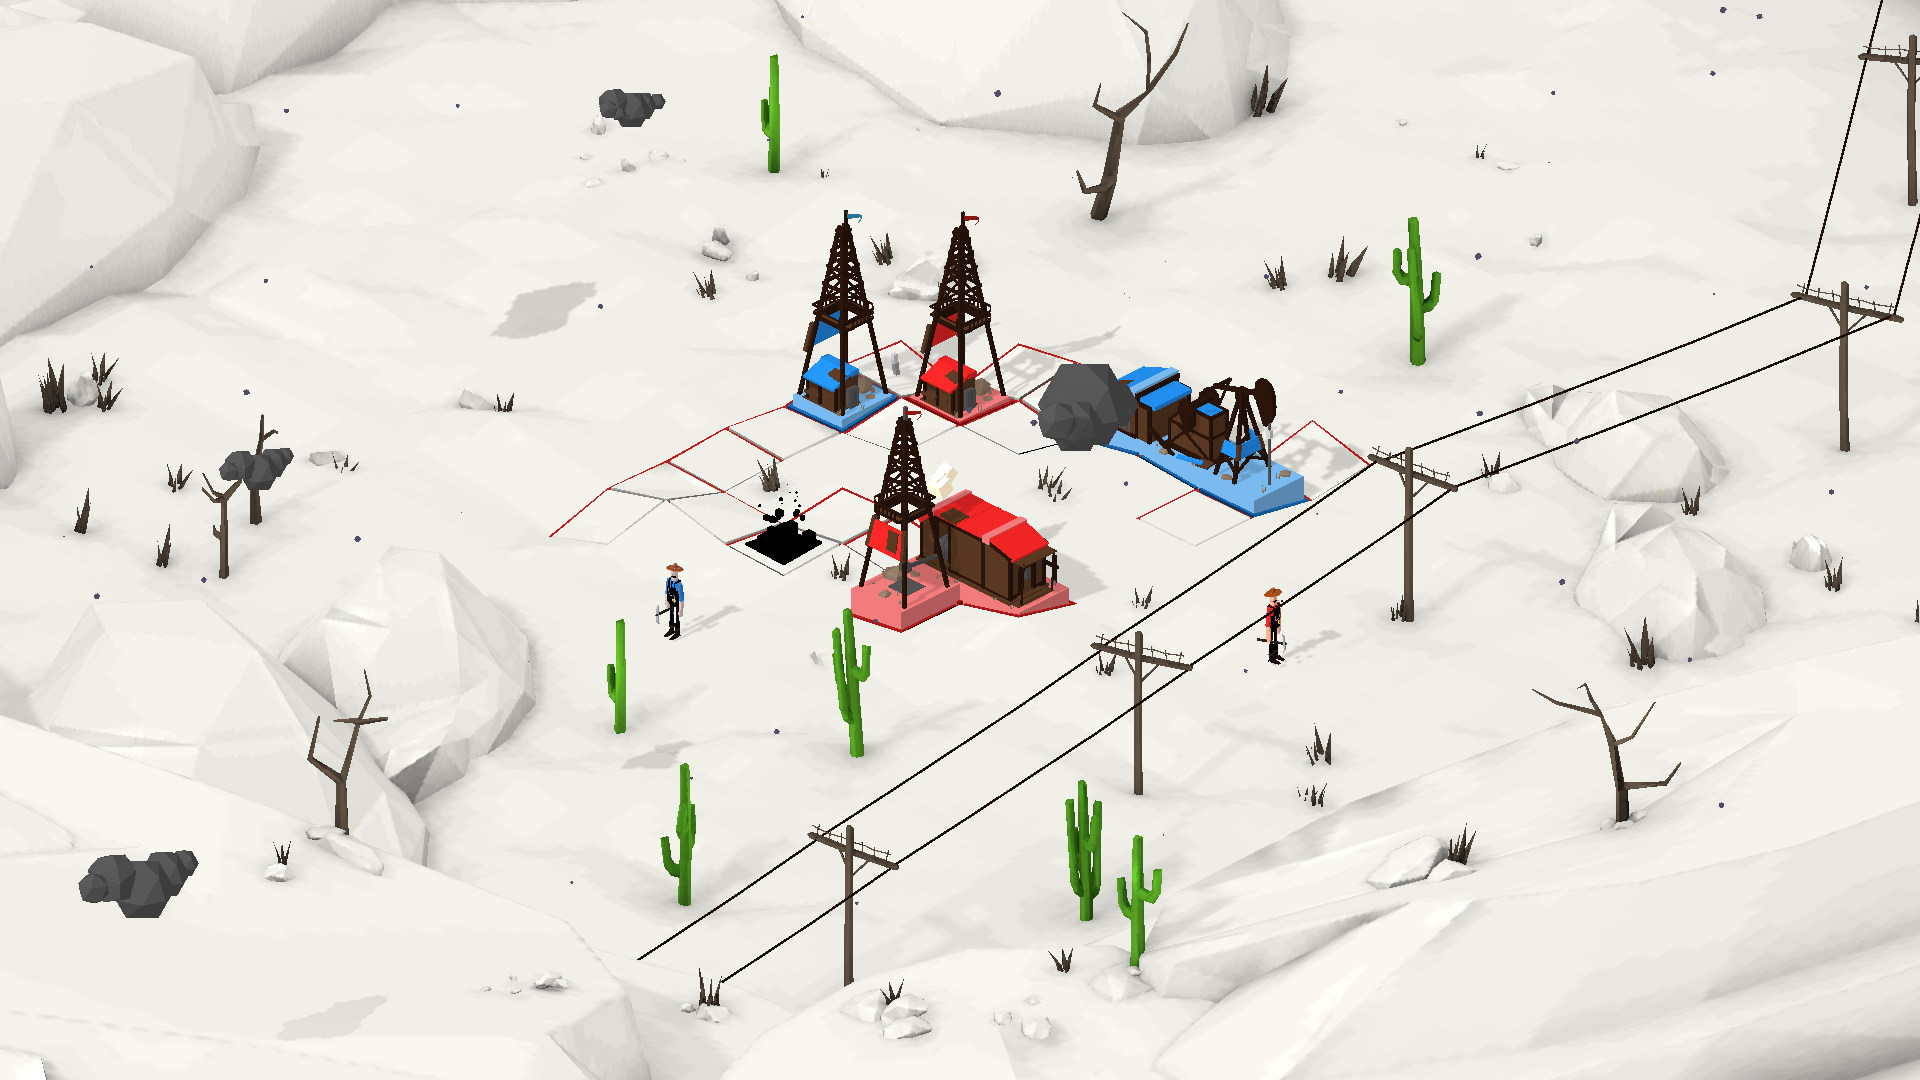 screenshot from game - OIL